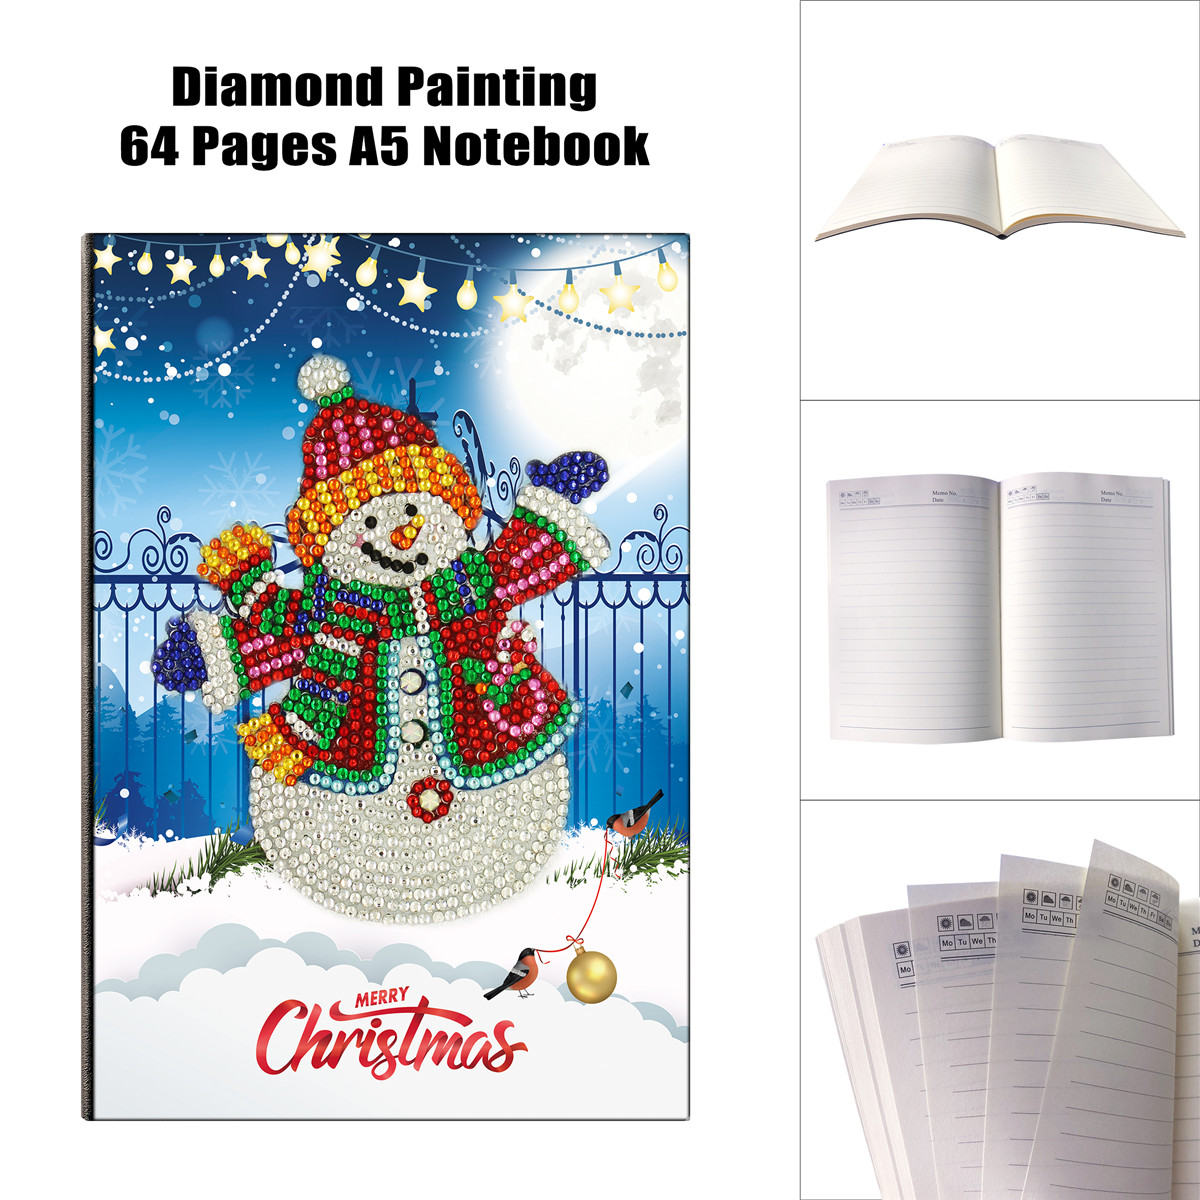 DIY-Diamond-Painting-Special-Shape-Diary-Book-Diamond-Decorations-A5-Notebook-Embroidery-kits-1561135-4